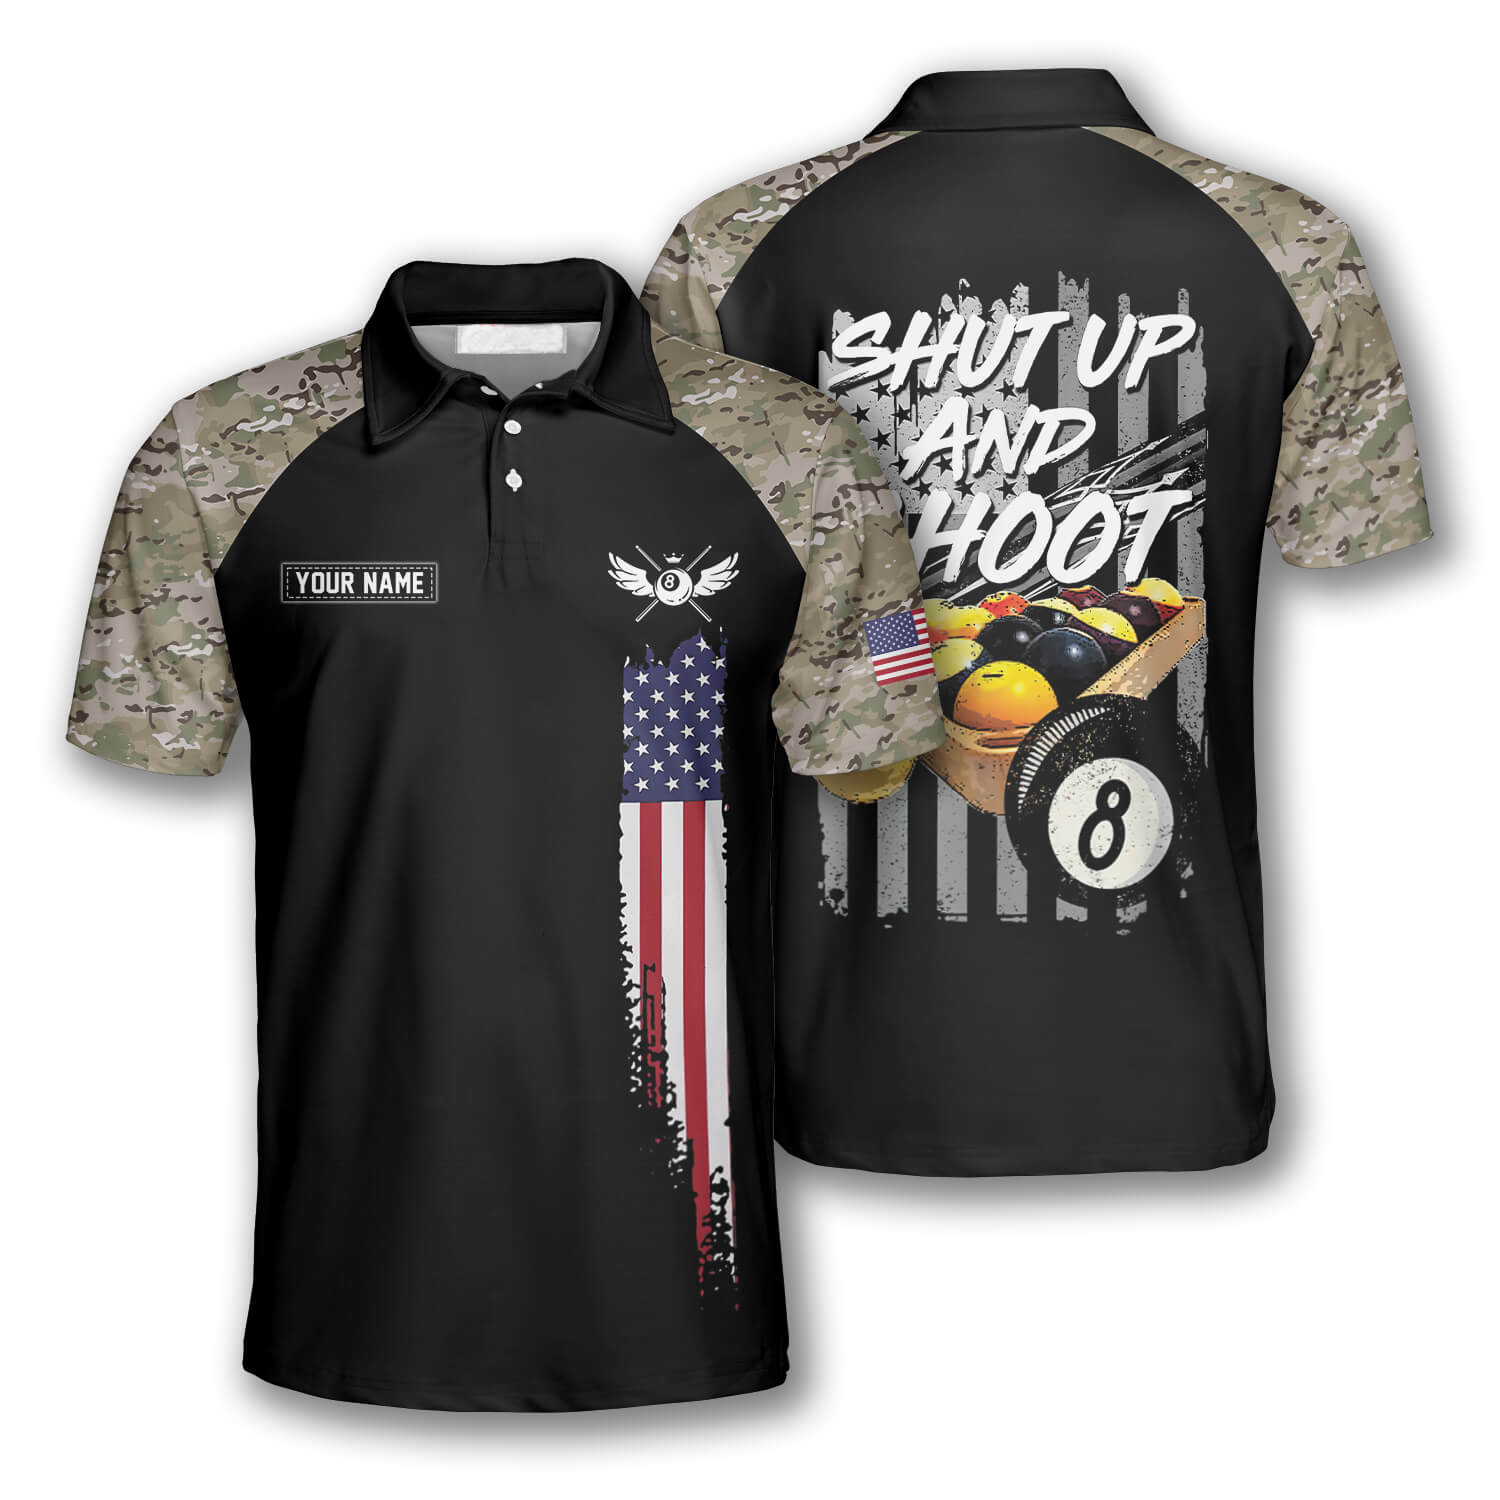 Personalized Billiard Camouflage Shut Up And Shoot Custom Billiard Polo Shirts for Men